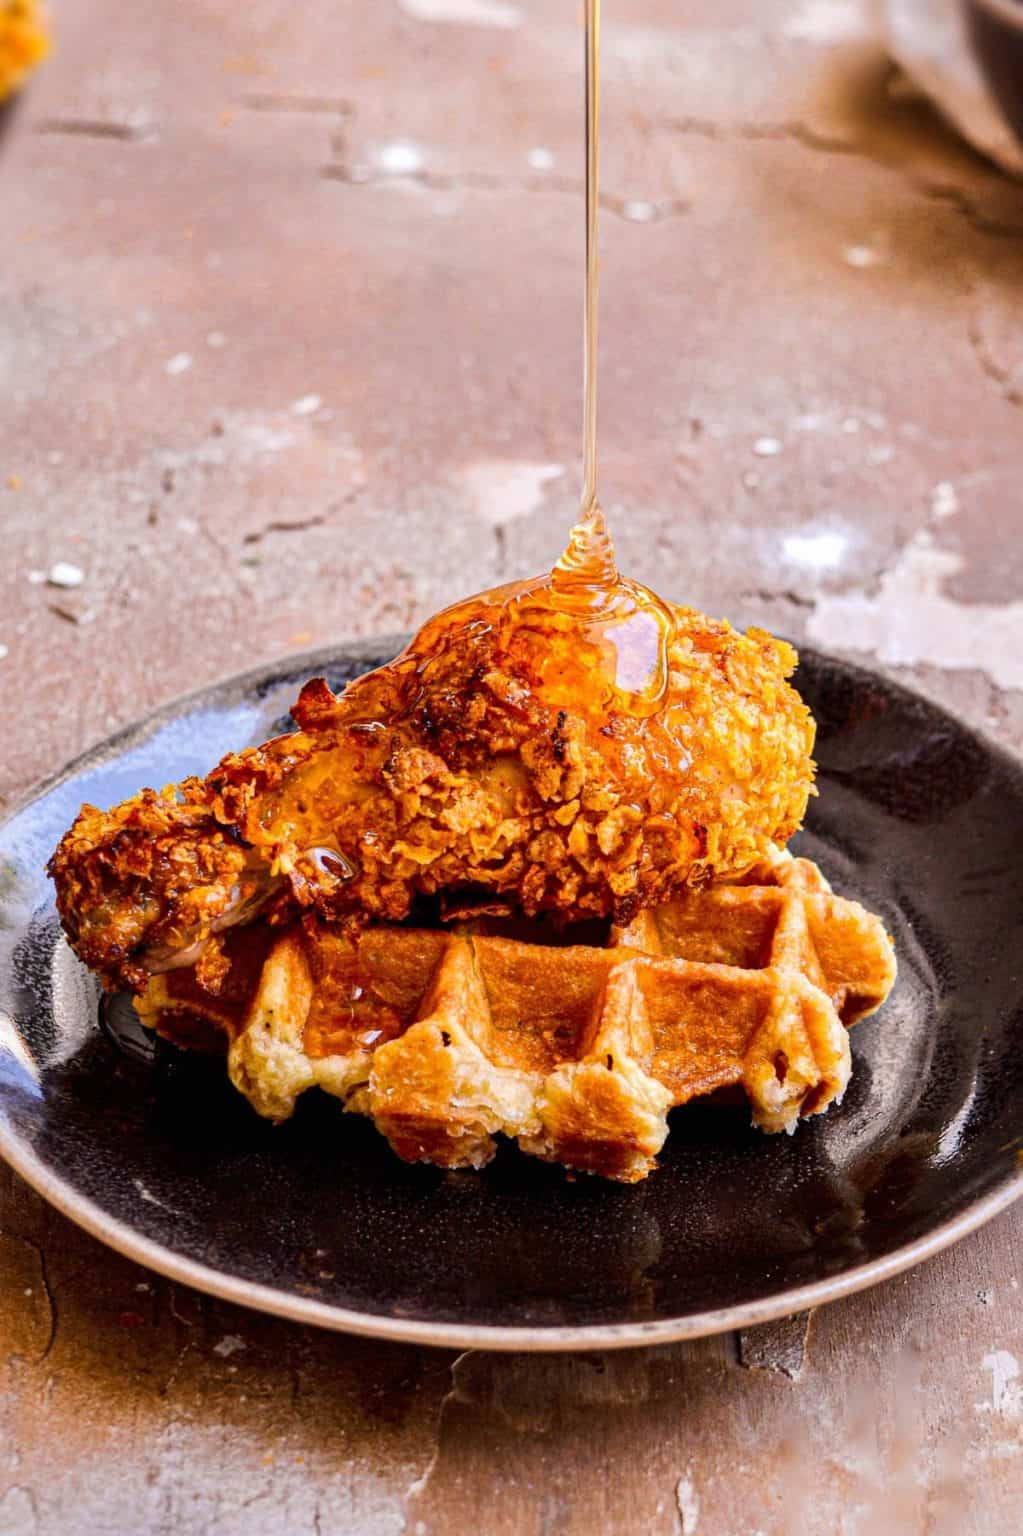 Best Chicken and Waffles Recipe - Easy Chicken Recipes (VIDEO!)